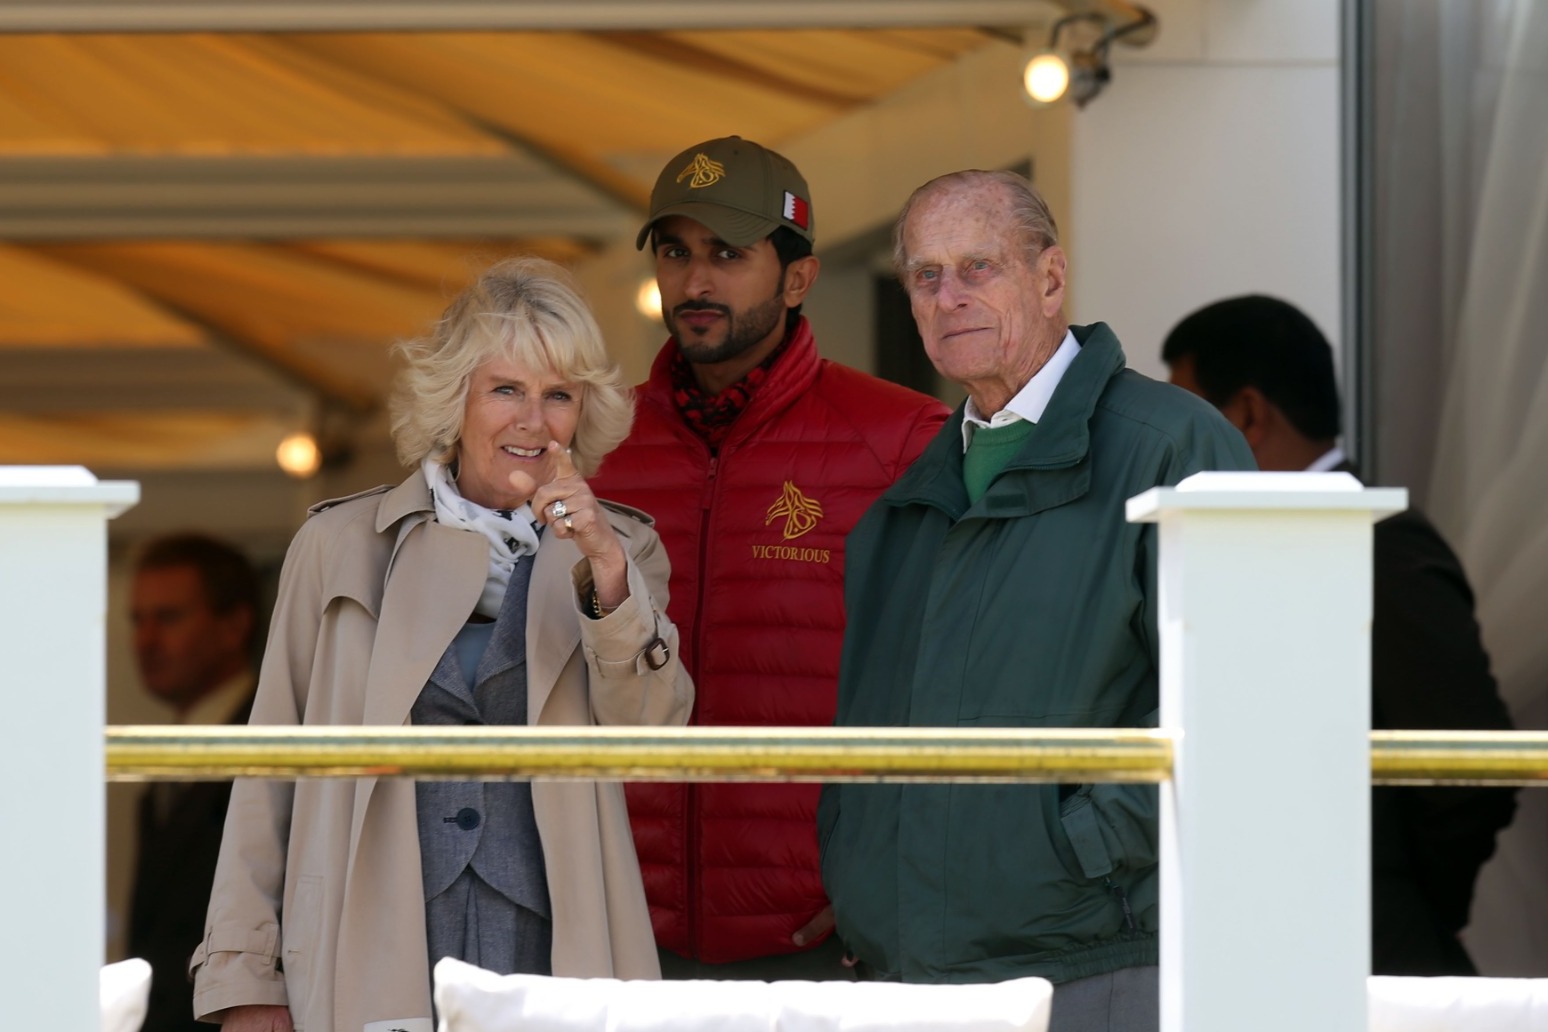 Camilla will not receive £360,000 annuity from Parliament like Philip 